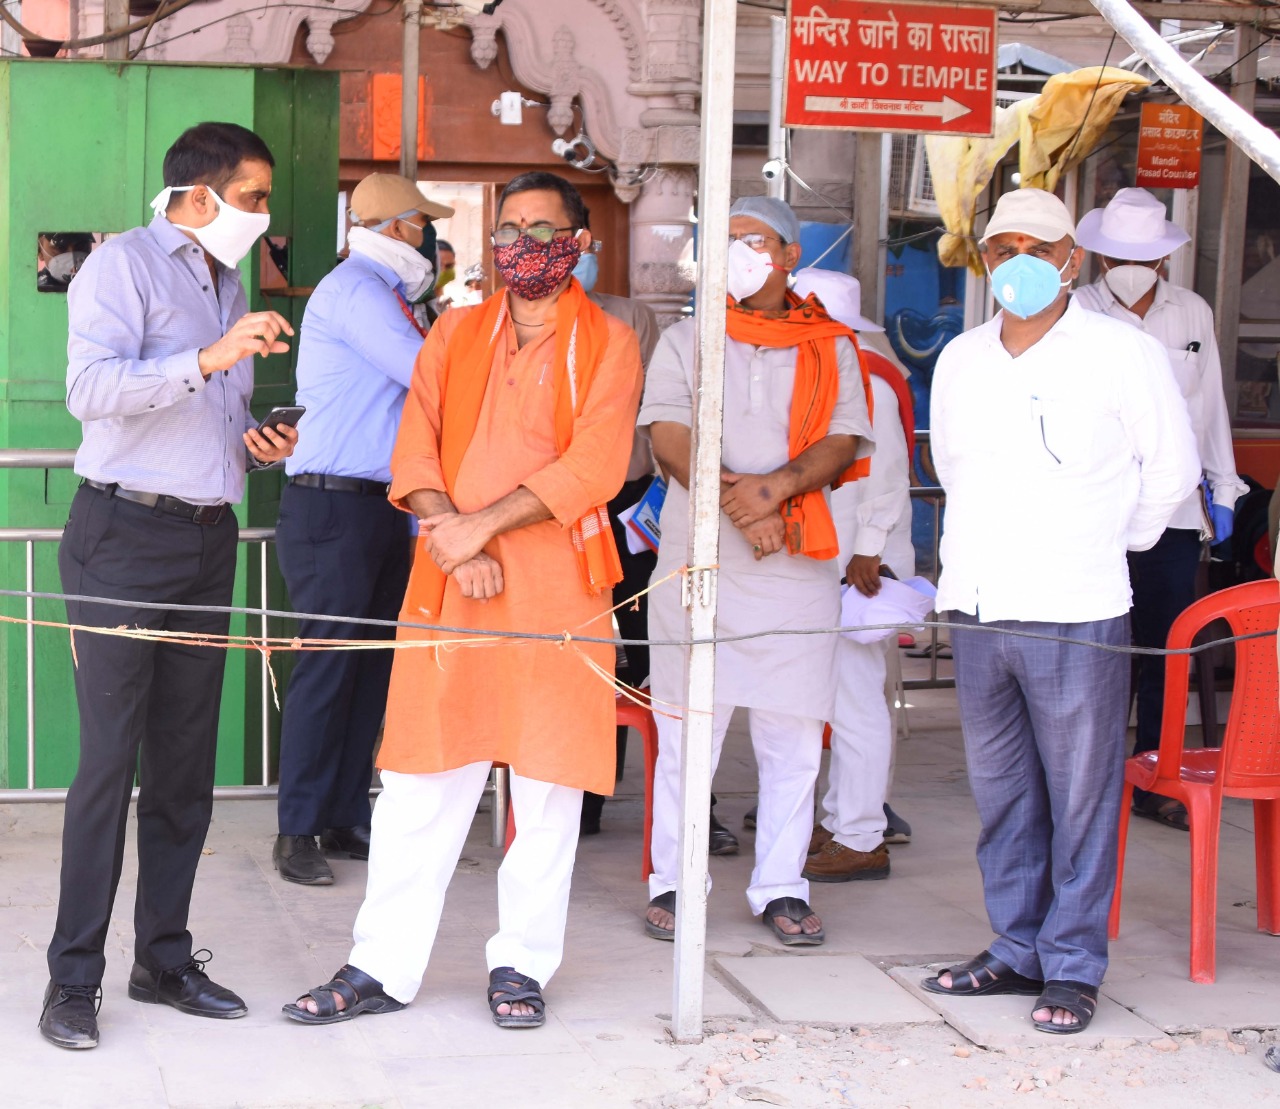 Hon'ble Minister of State (Independent Charge) for Tourism, Culture and Charitable Affairs Shri Neelkanth Ad Ji along with Commissioner Mr. Deepak Agrawal ji inspected the construction of Shri Kashi Vishwanath Dham